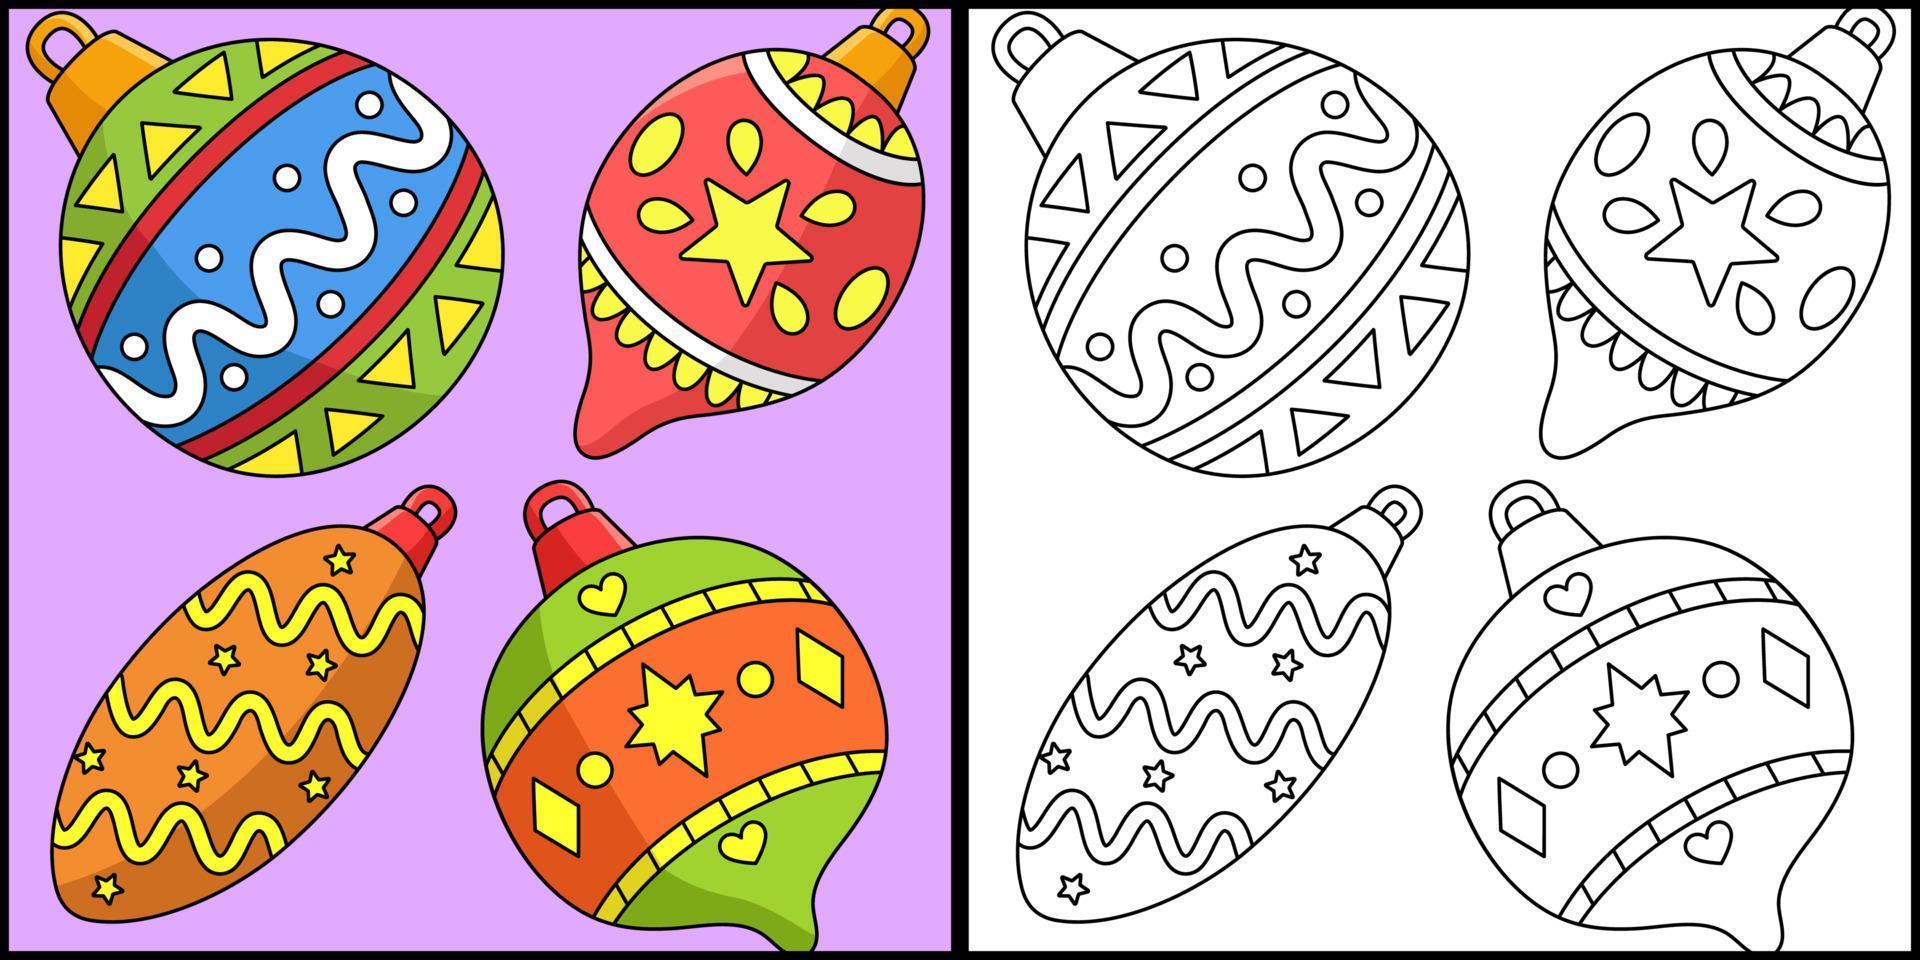 Christmas Ornament Coloring Page Illustration vector